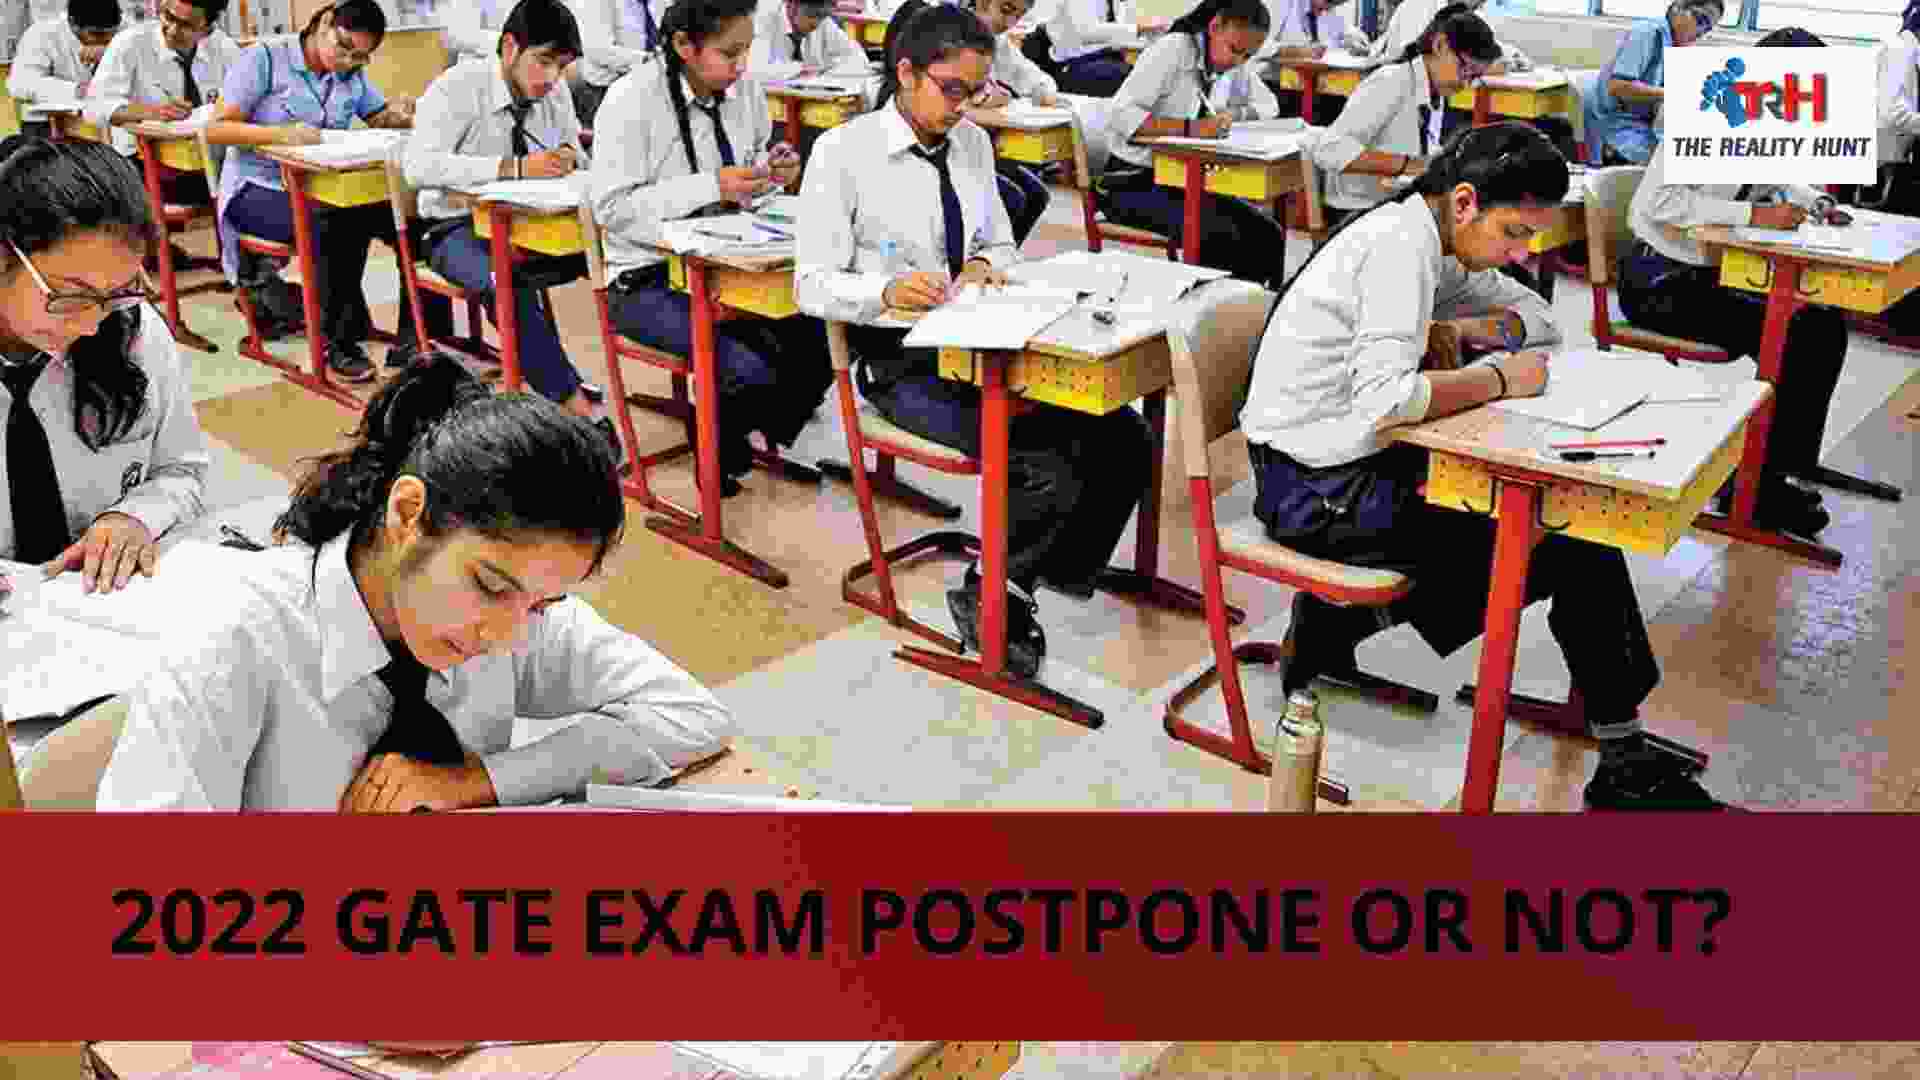 GATE 2022 Exam Survey: 91% of aspirants want the exam to be postponed